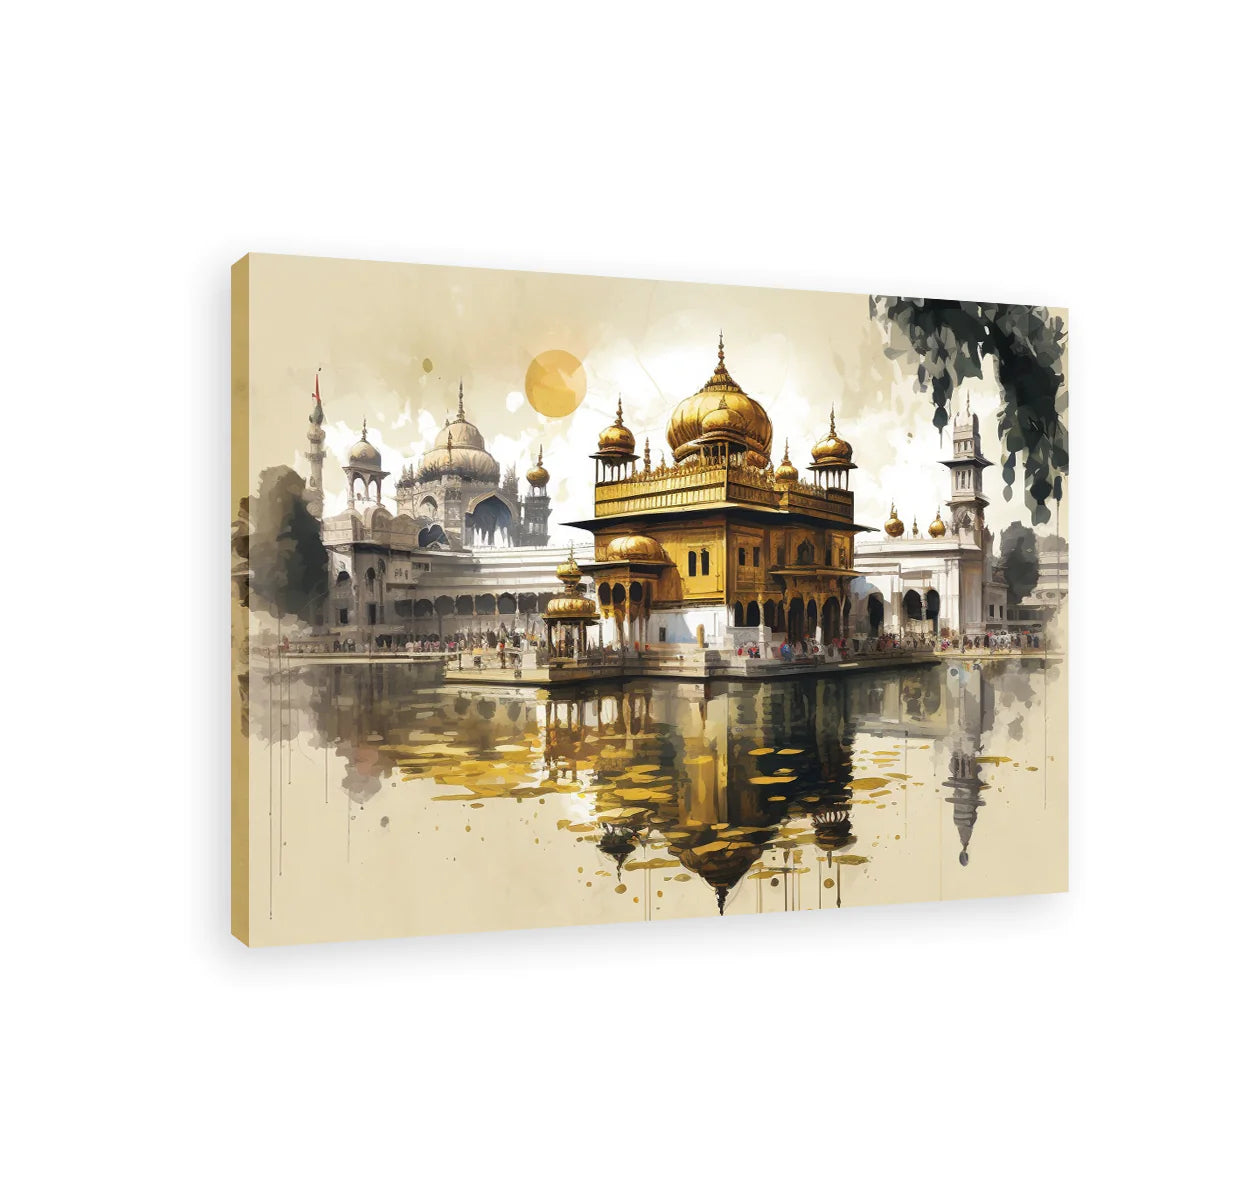 Masterpiece of The Golden Temple